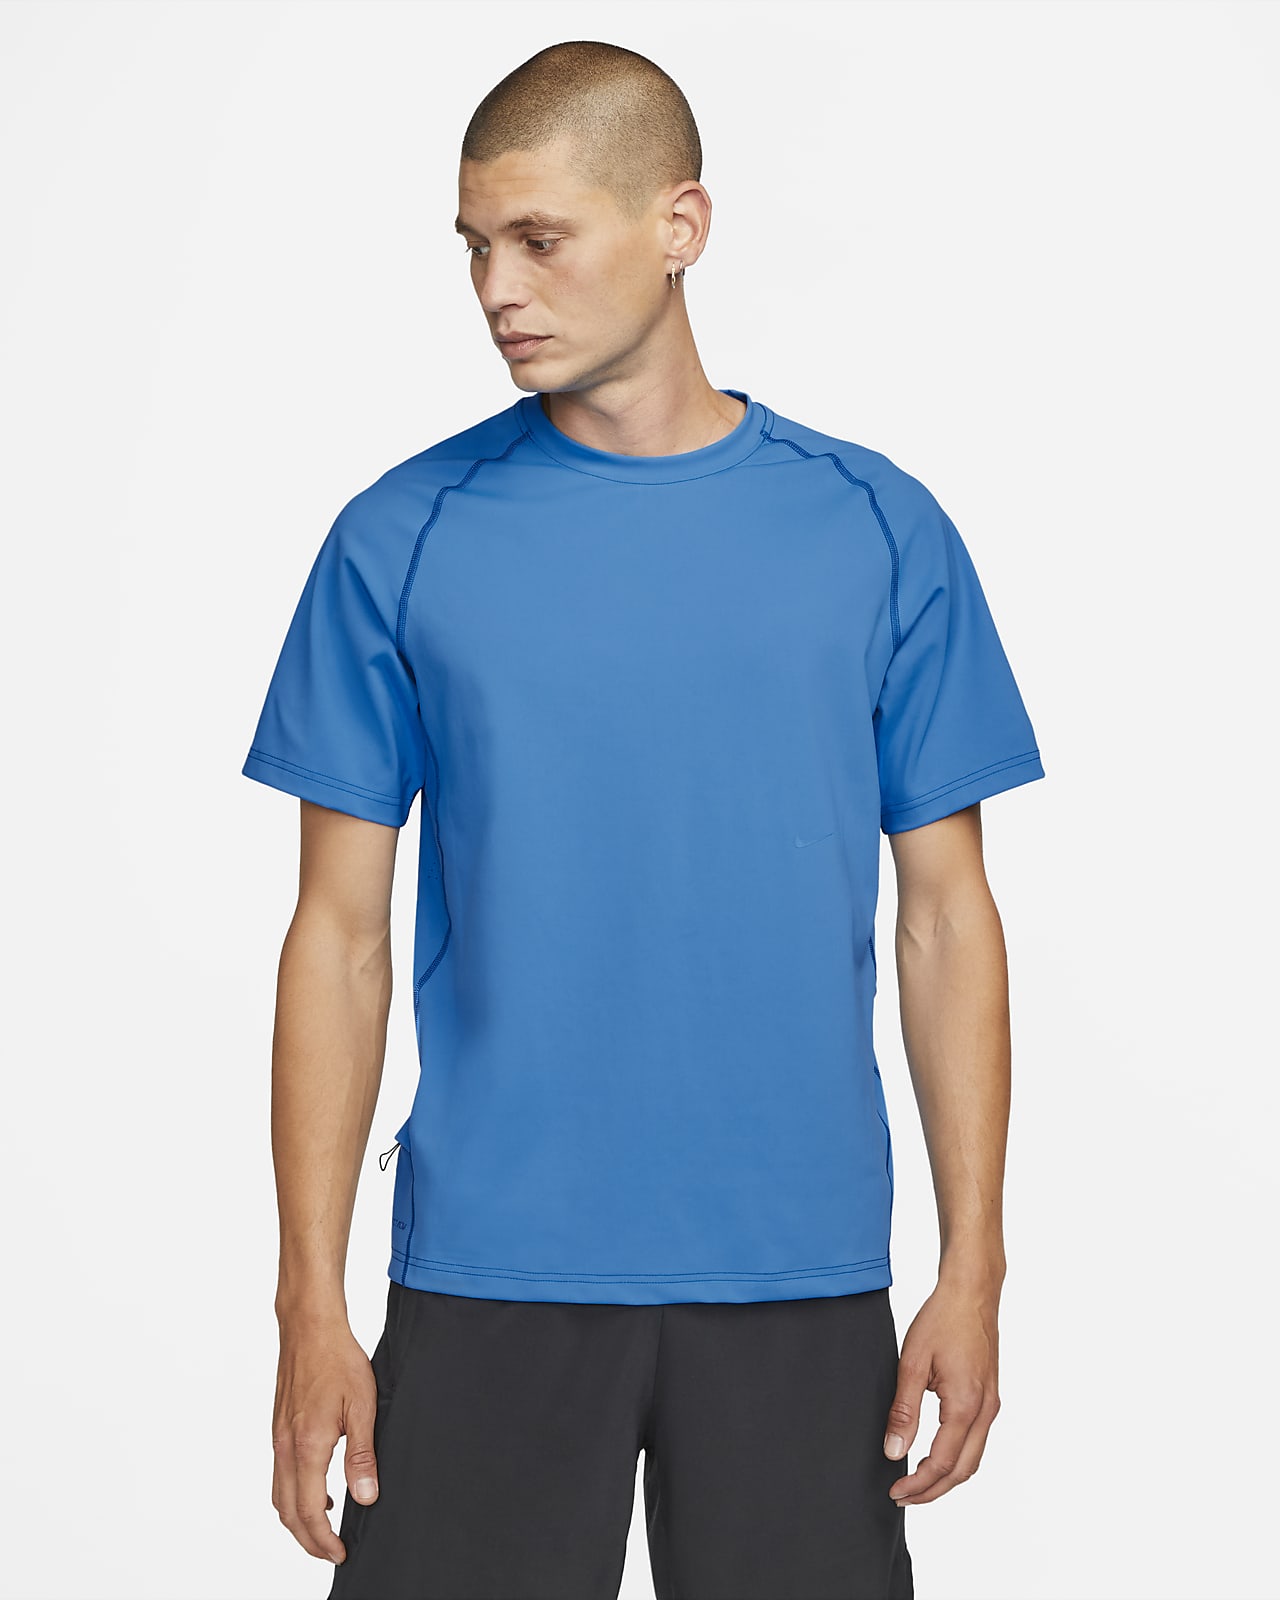 Men's Workout Fitness Sports T-shirt Round-neck Short Sleeve Dri-fit Breathable 